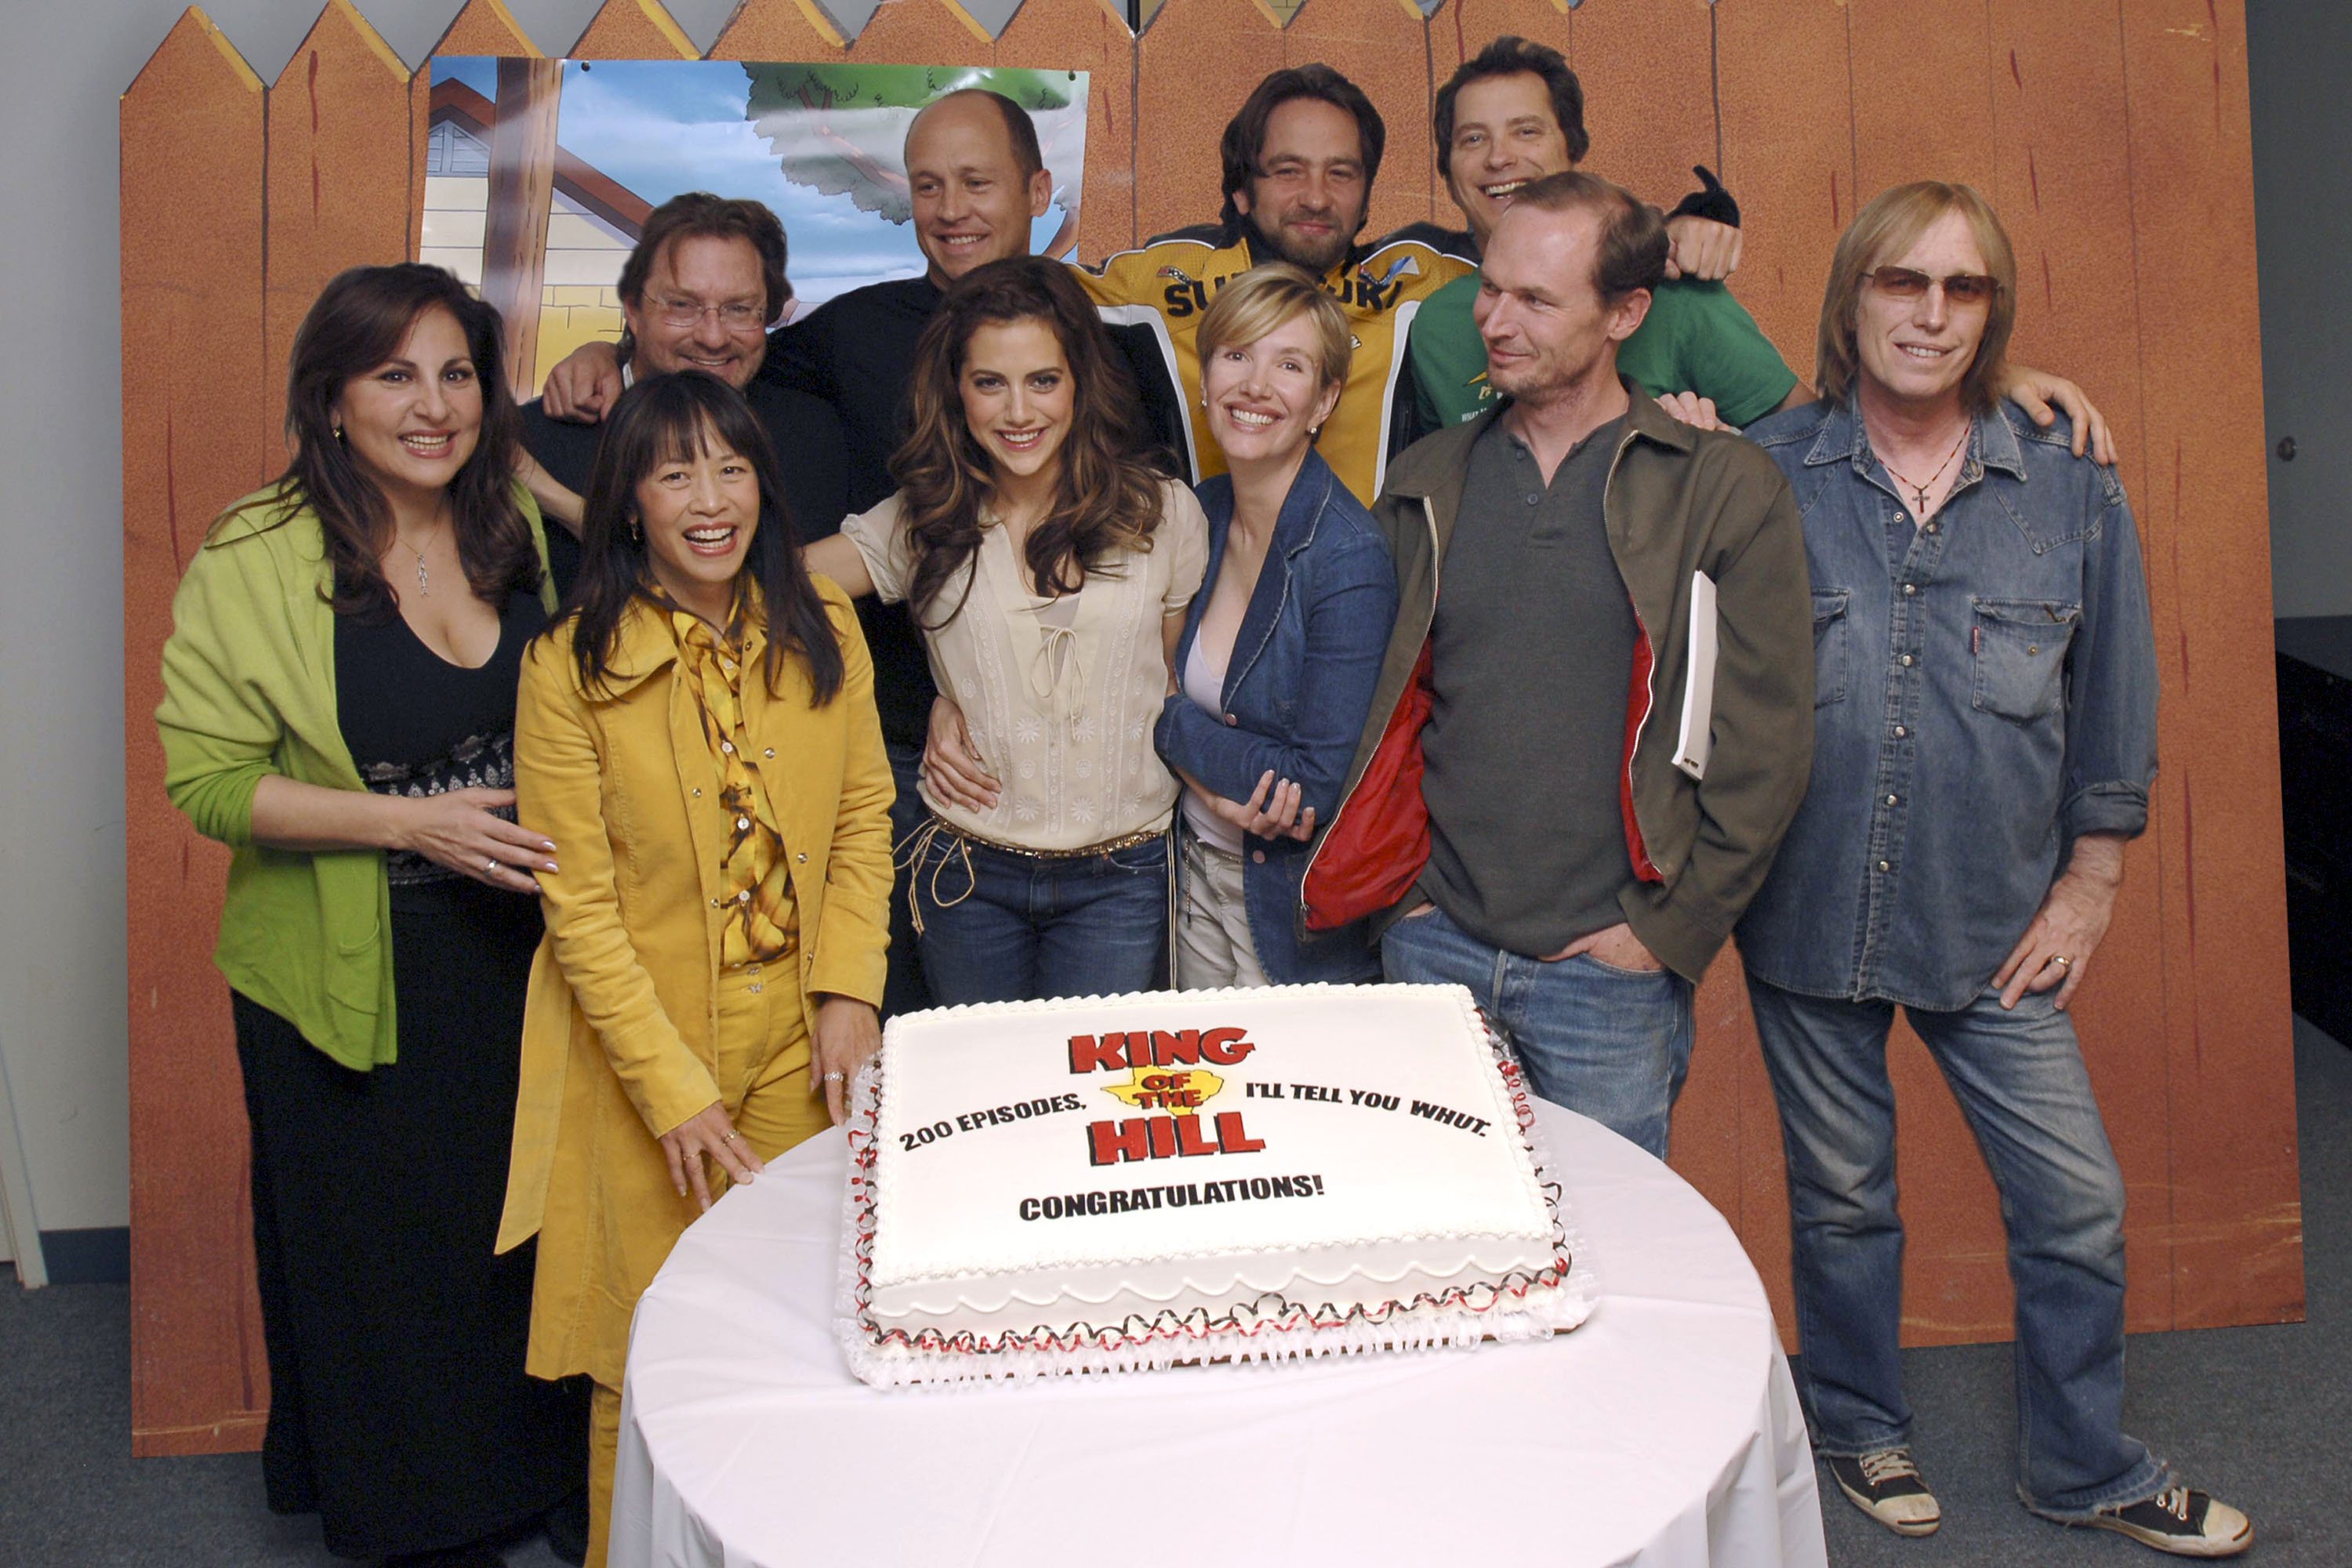 'King of the Hill' cast poses with a cake to celebrate the show's 200th episode.